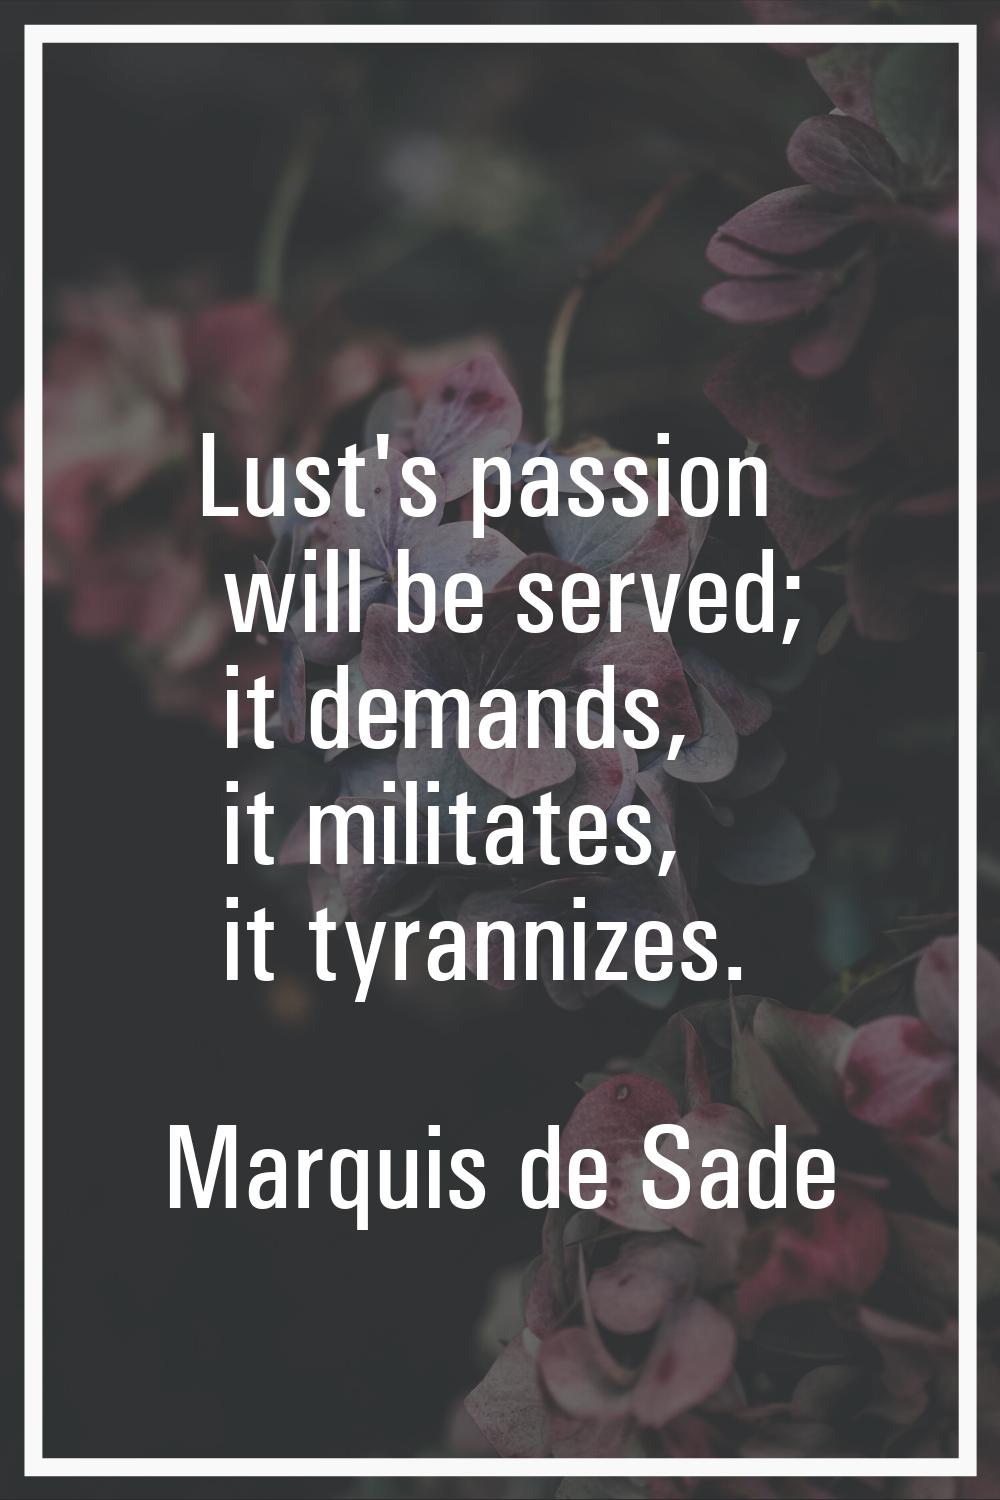 Lust's passion will be served; it demands, it militates, it tyrannizes.